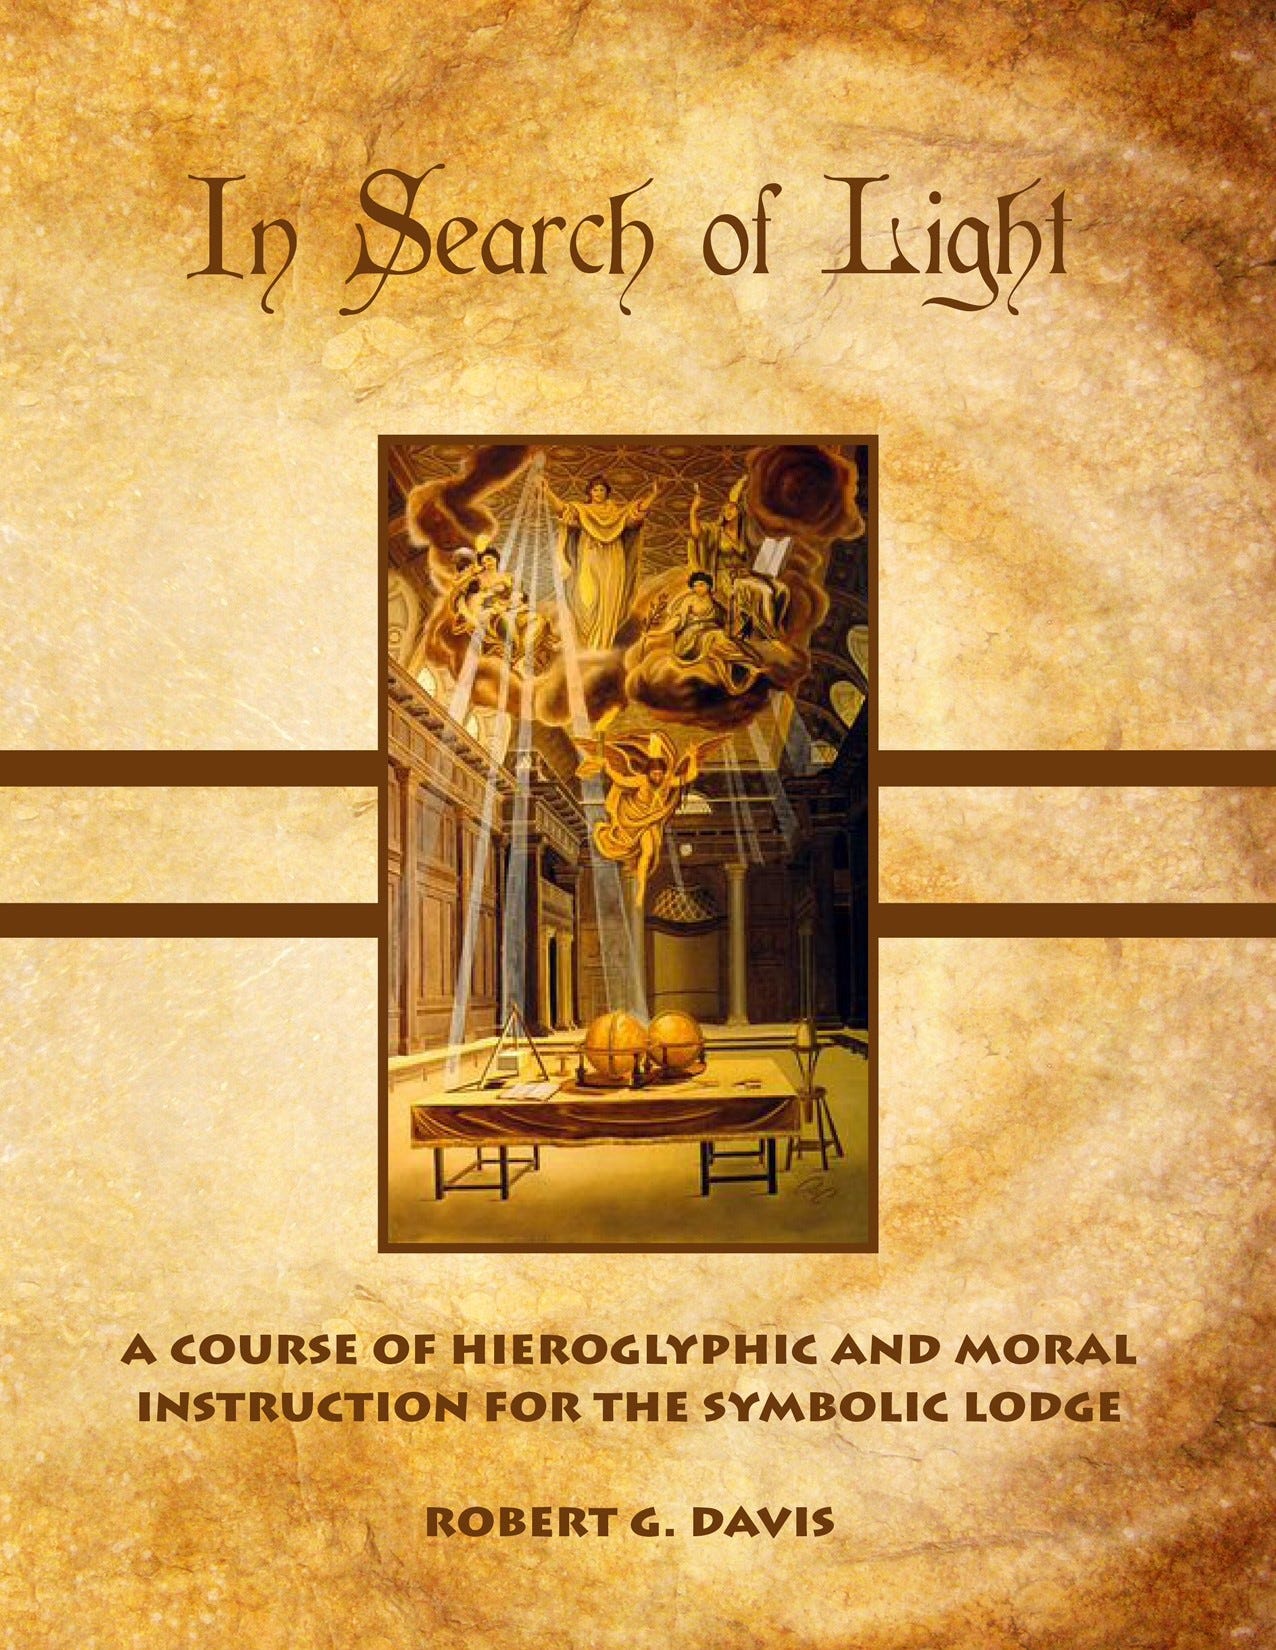 Book: In Search Of Light